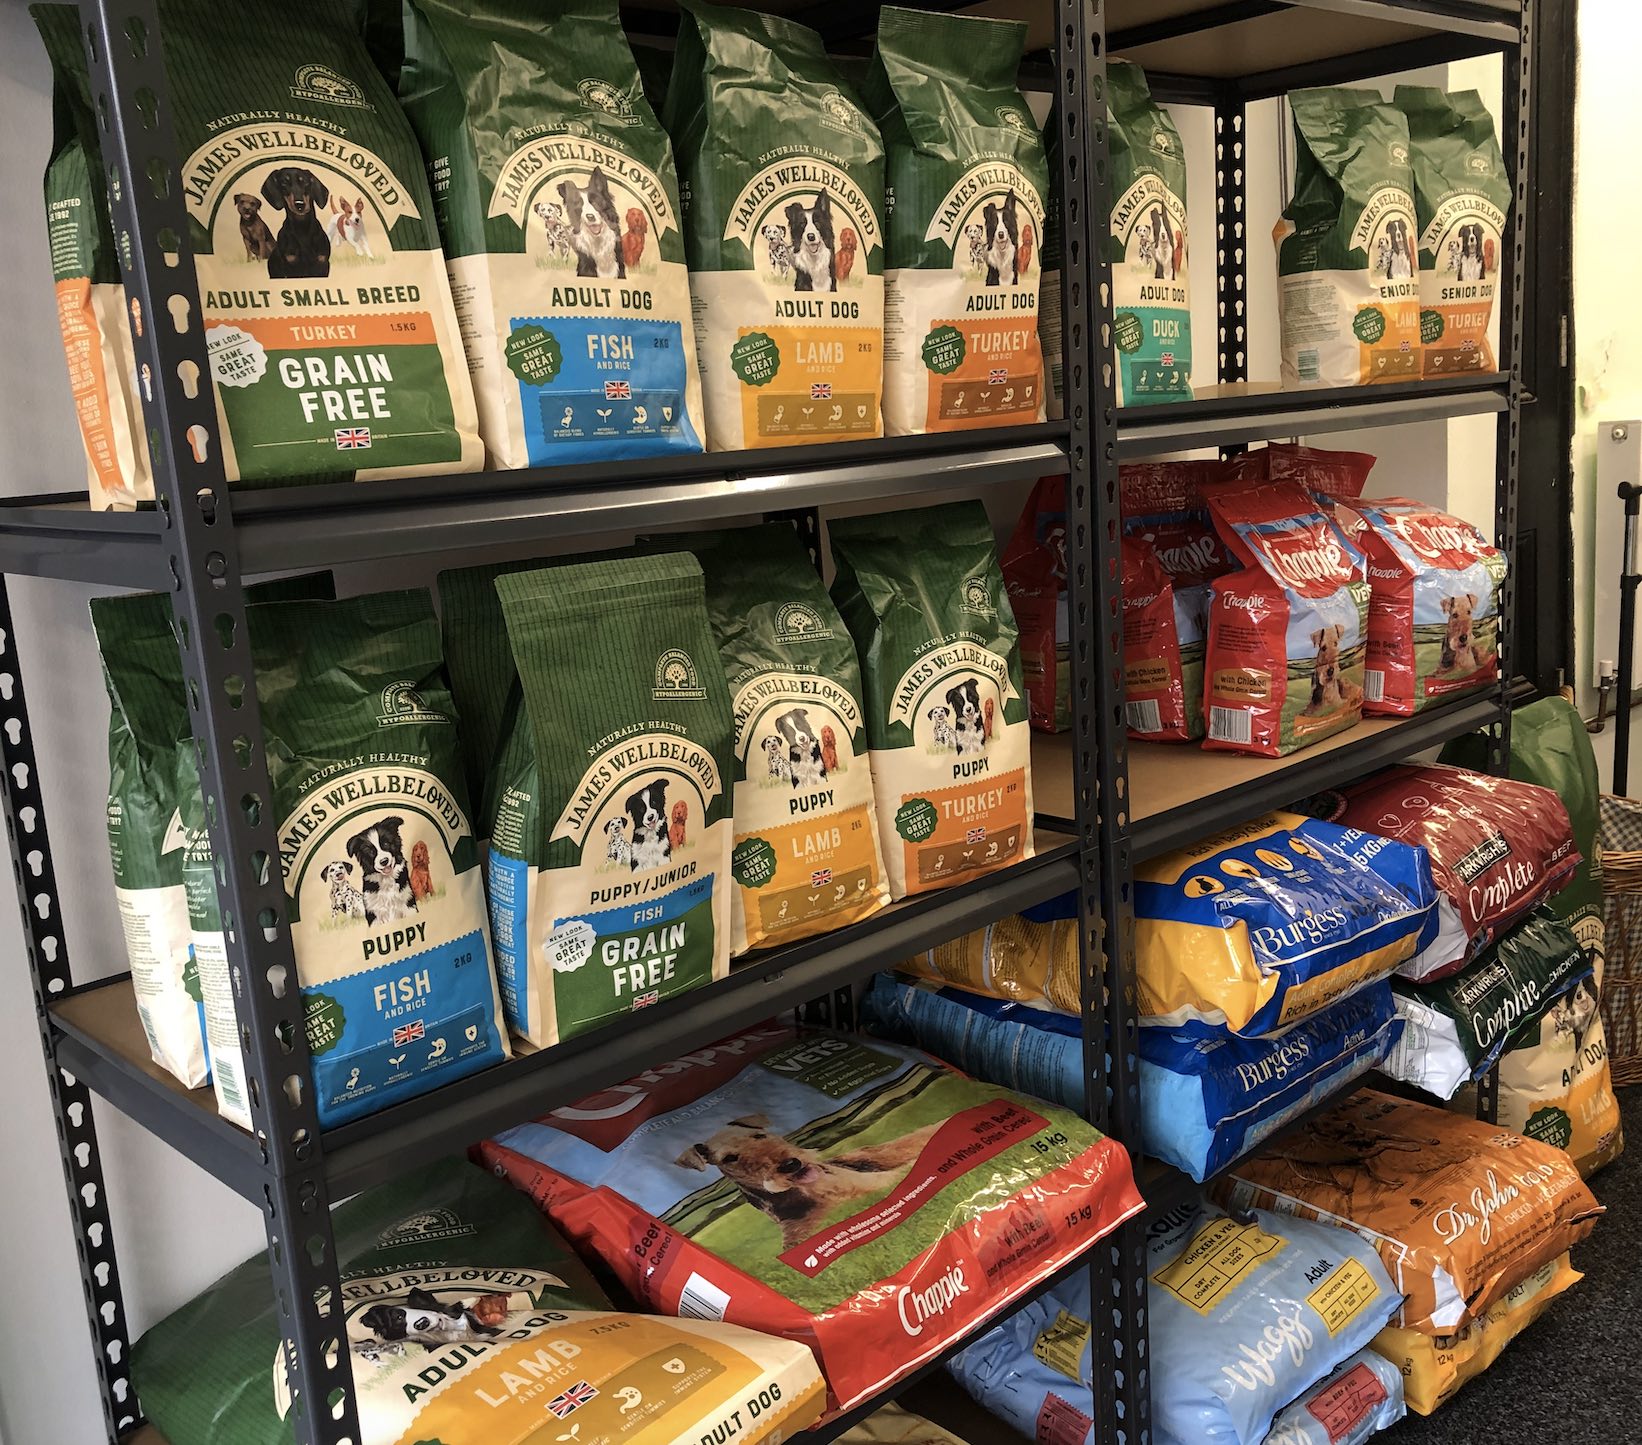 Shelves stacked with various brands of dog food.